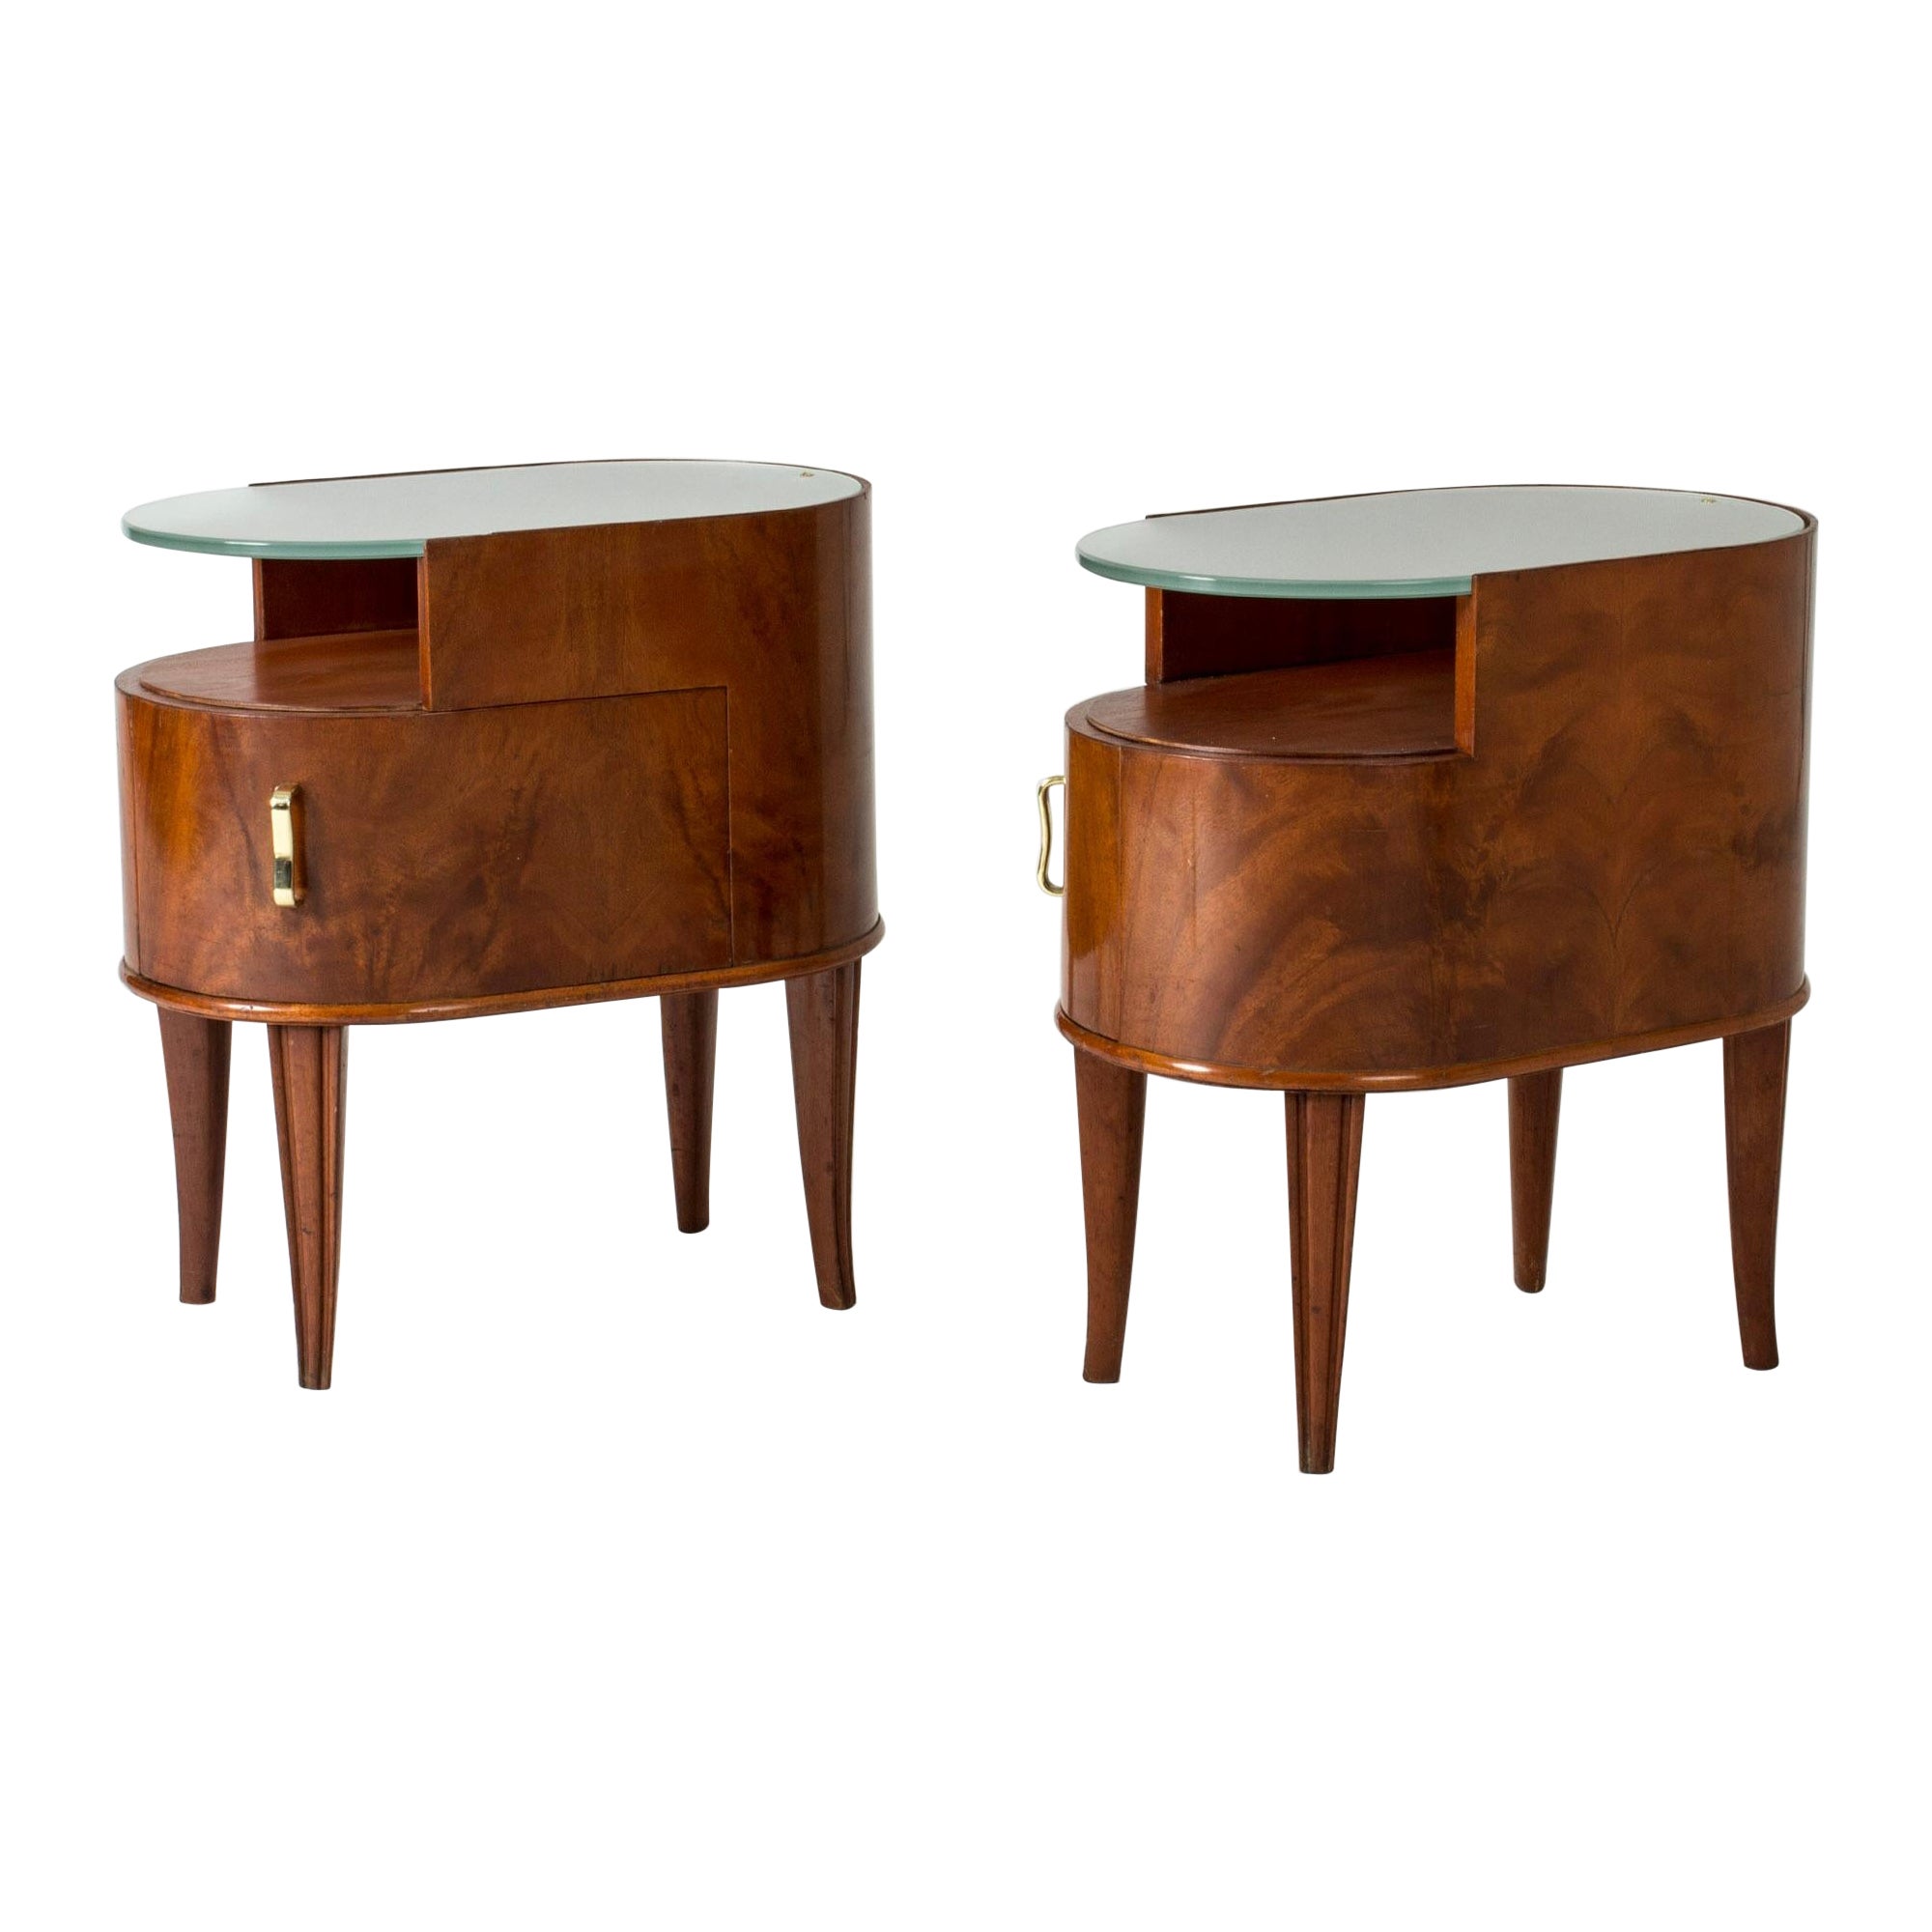 Vintage Midcentury Bedside Tables by Axel Larsson, Sweden, 1940s